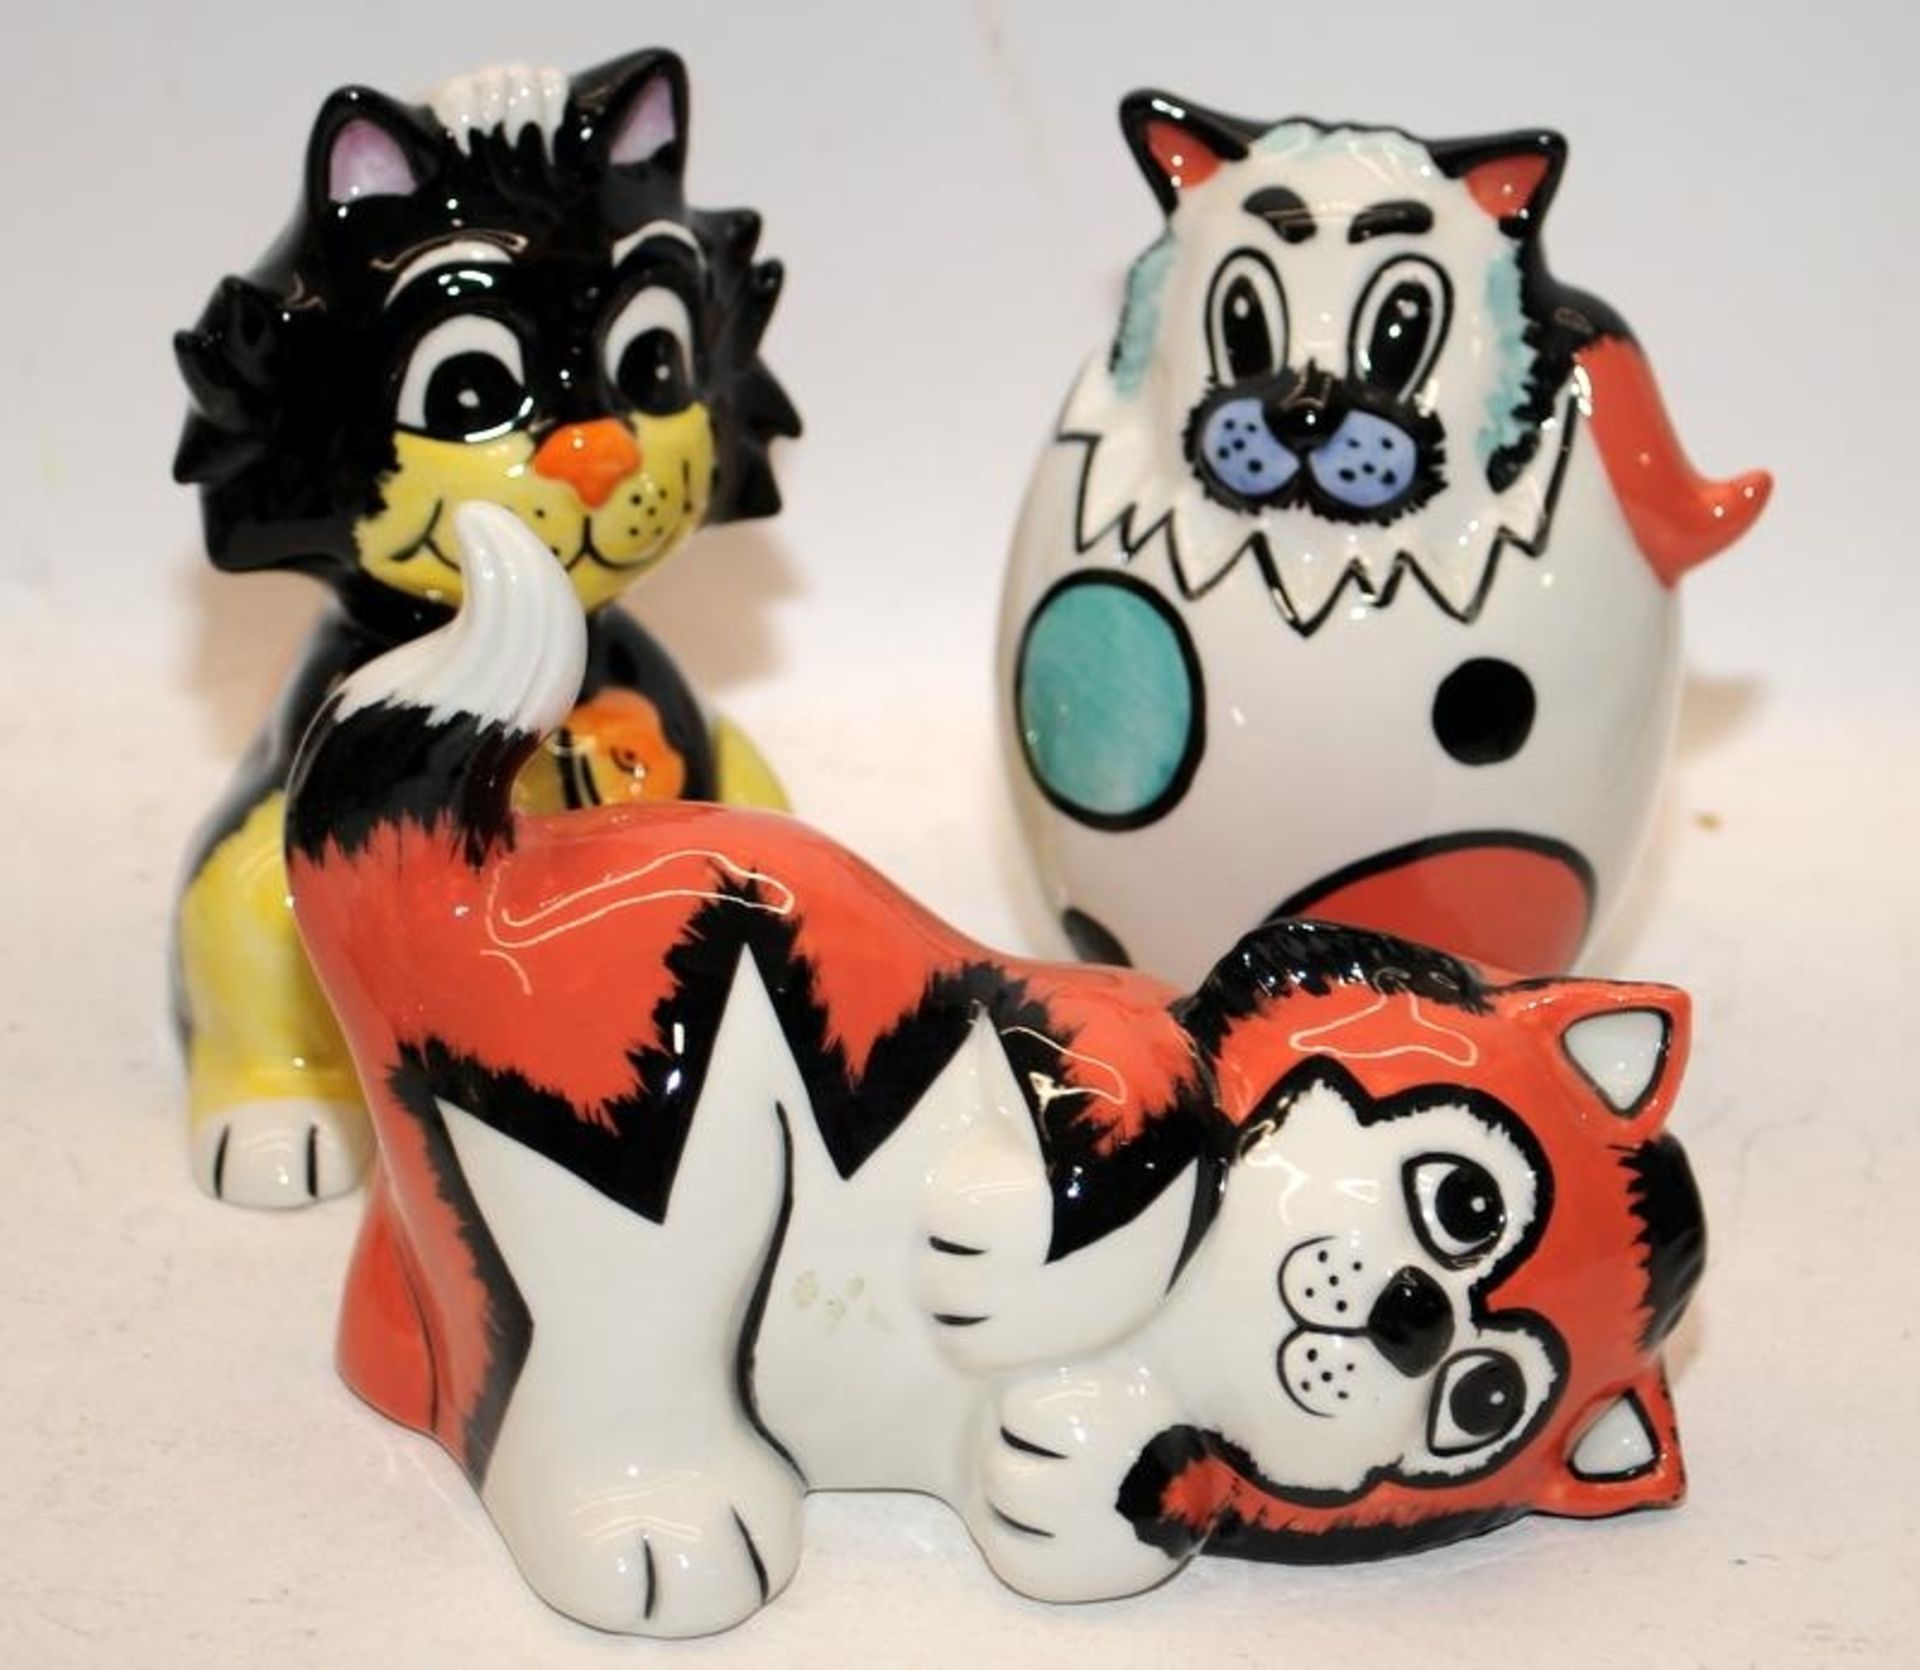 5 x Lorna Bailey cat figures including Tilly, Kipper, Eggbert and Charlie. All signed - Image 3 of 3